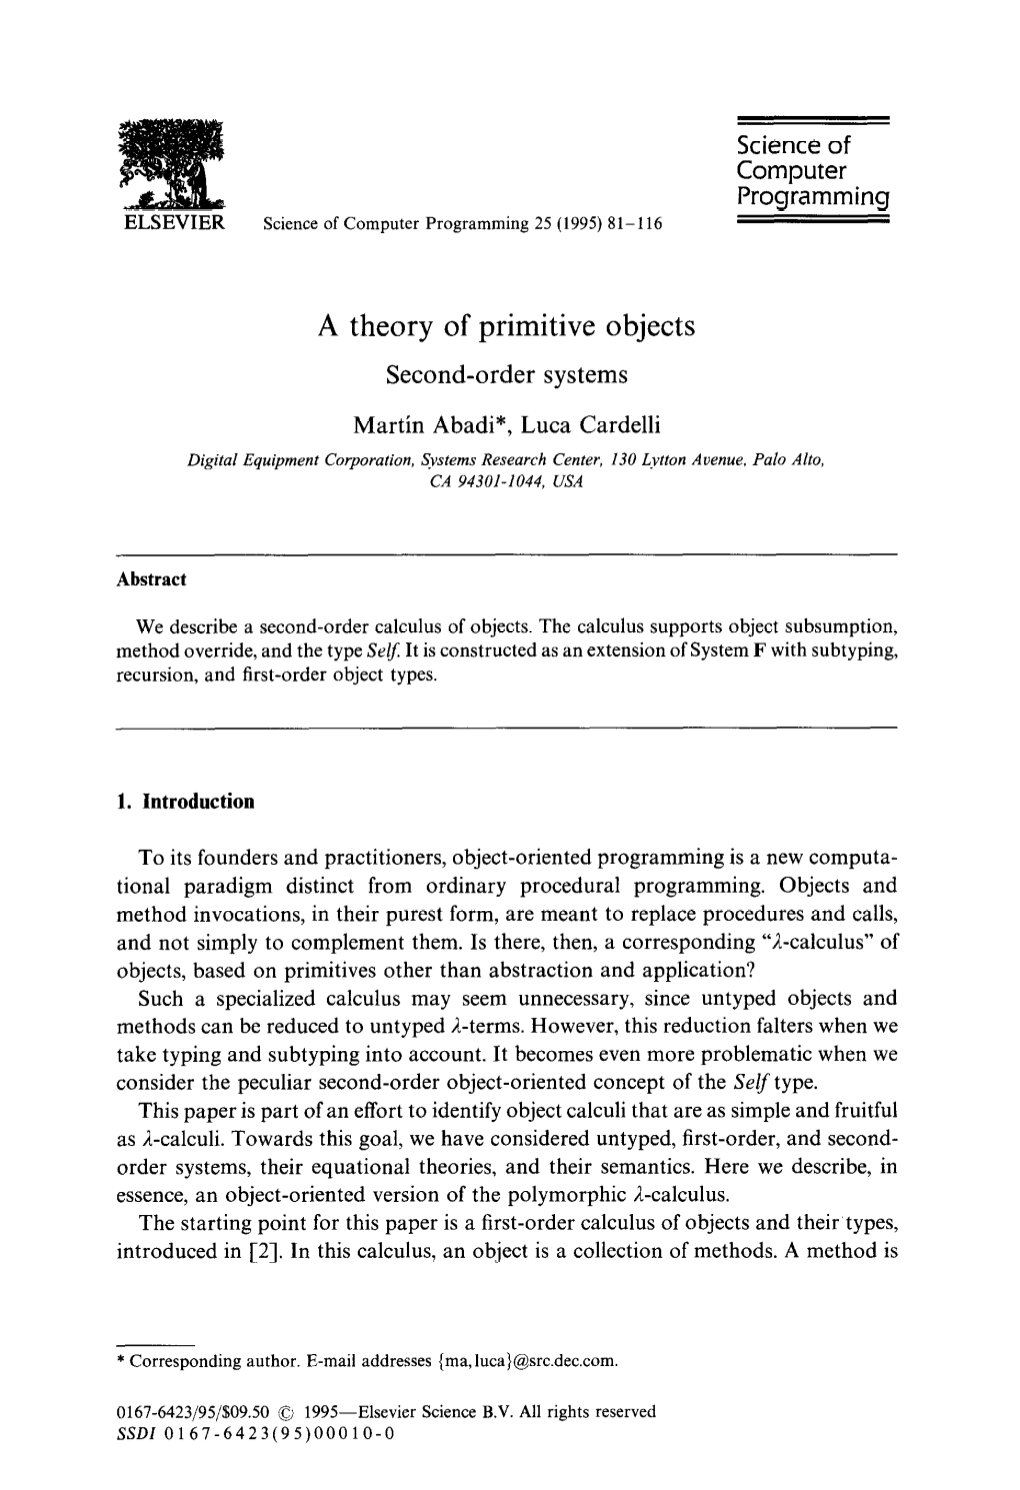 Science of Computer Programming a Theory of Primitive Objects Second